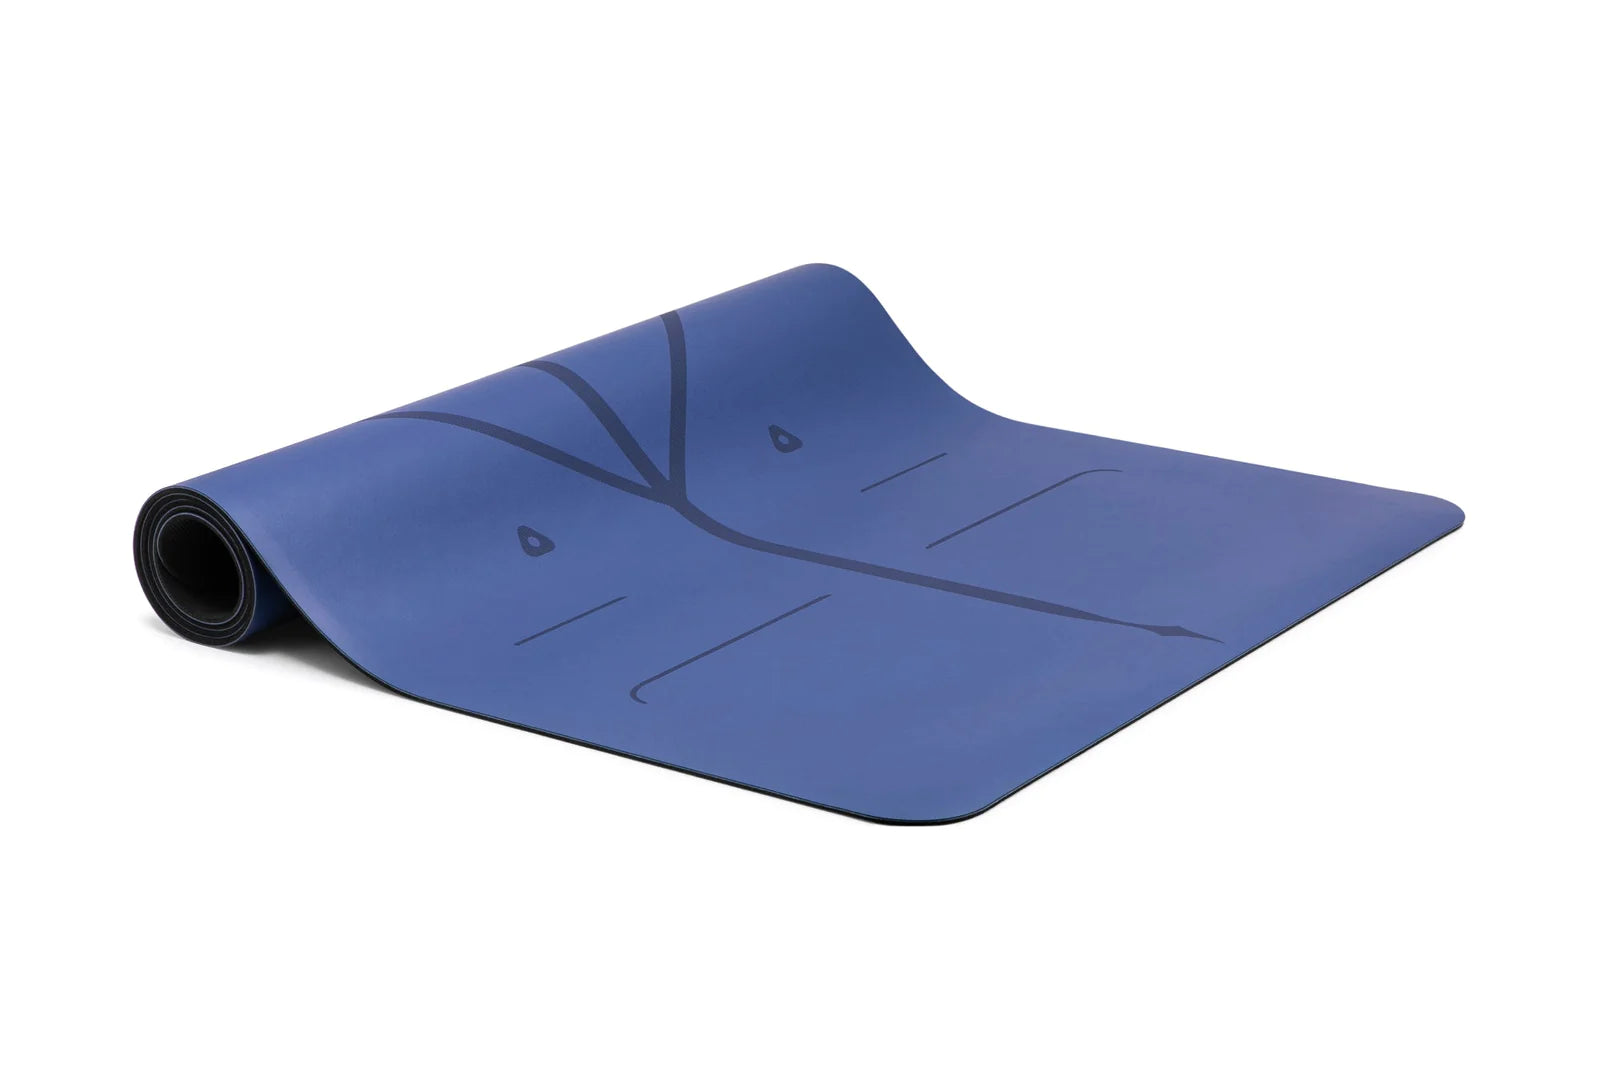 Non-slip yoga mat in Dusk Blue color - Liforme Yoga Mat for a grounded and centered practice